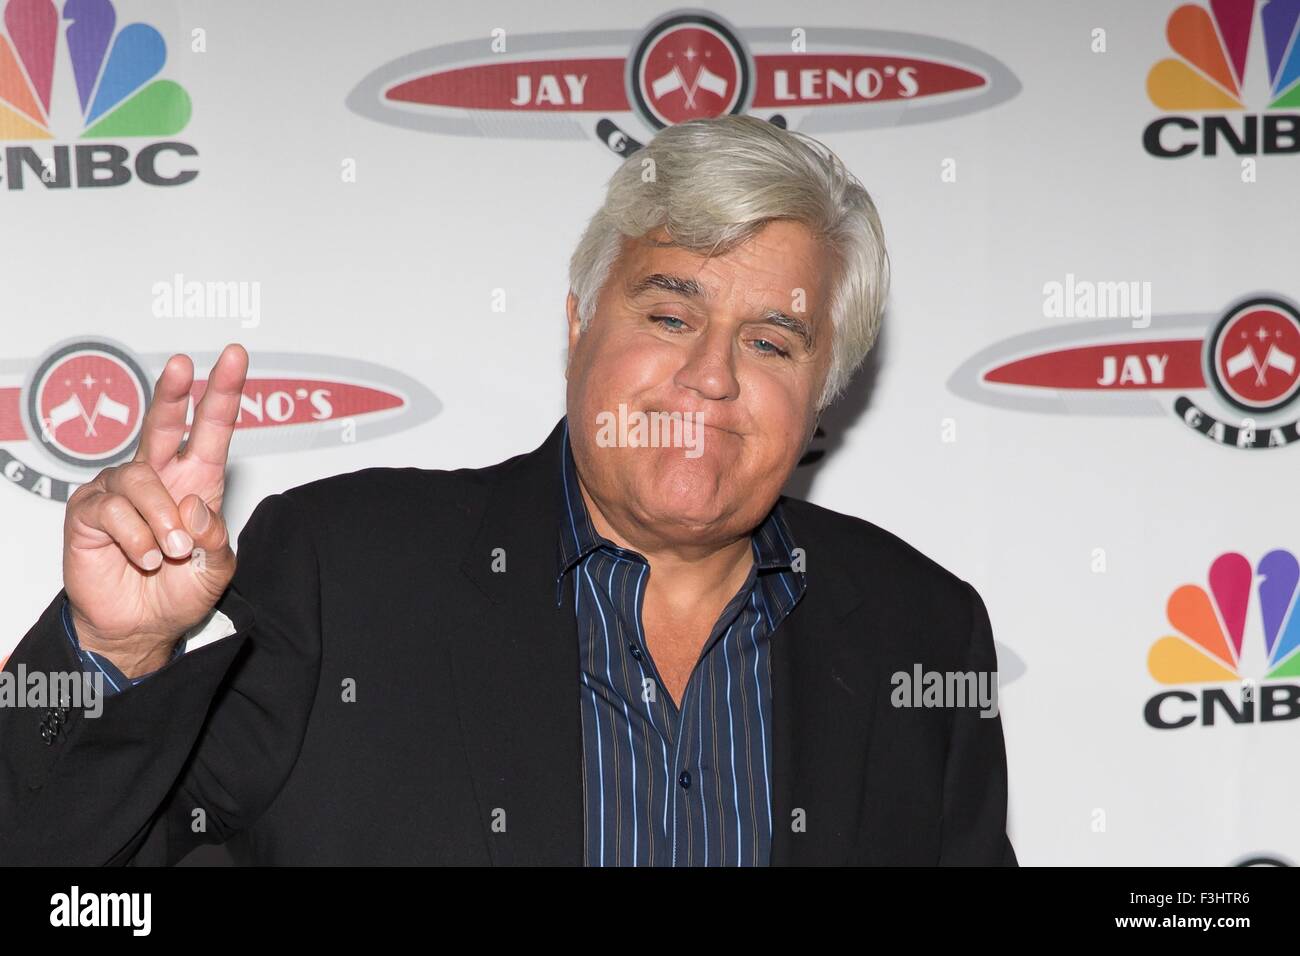 New York, NY, USA. 7th Oct, 2015. Jay Leno at arrivals for JAY LENO'S GARAGE Launch Party, The Press Lounge at Ink 48, New York, NY October 7, 2015. Credit:  Jason Smith/Everett Collection/Alamy Live News Stock Photo